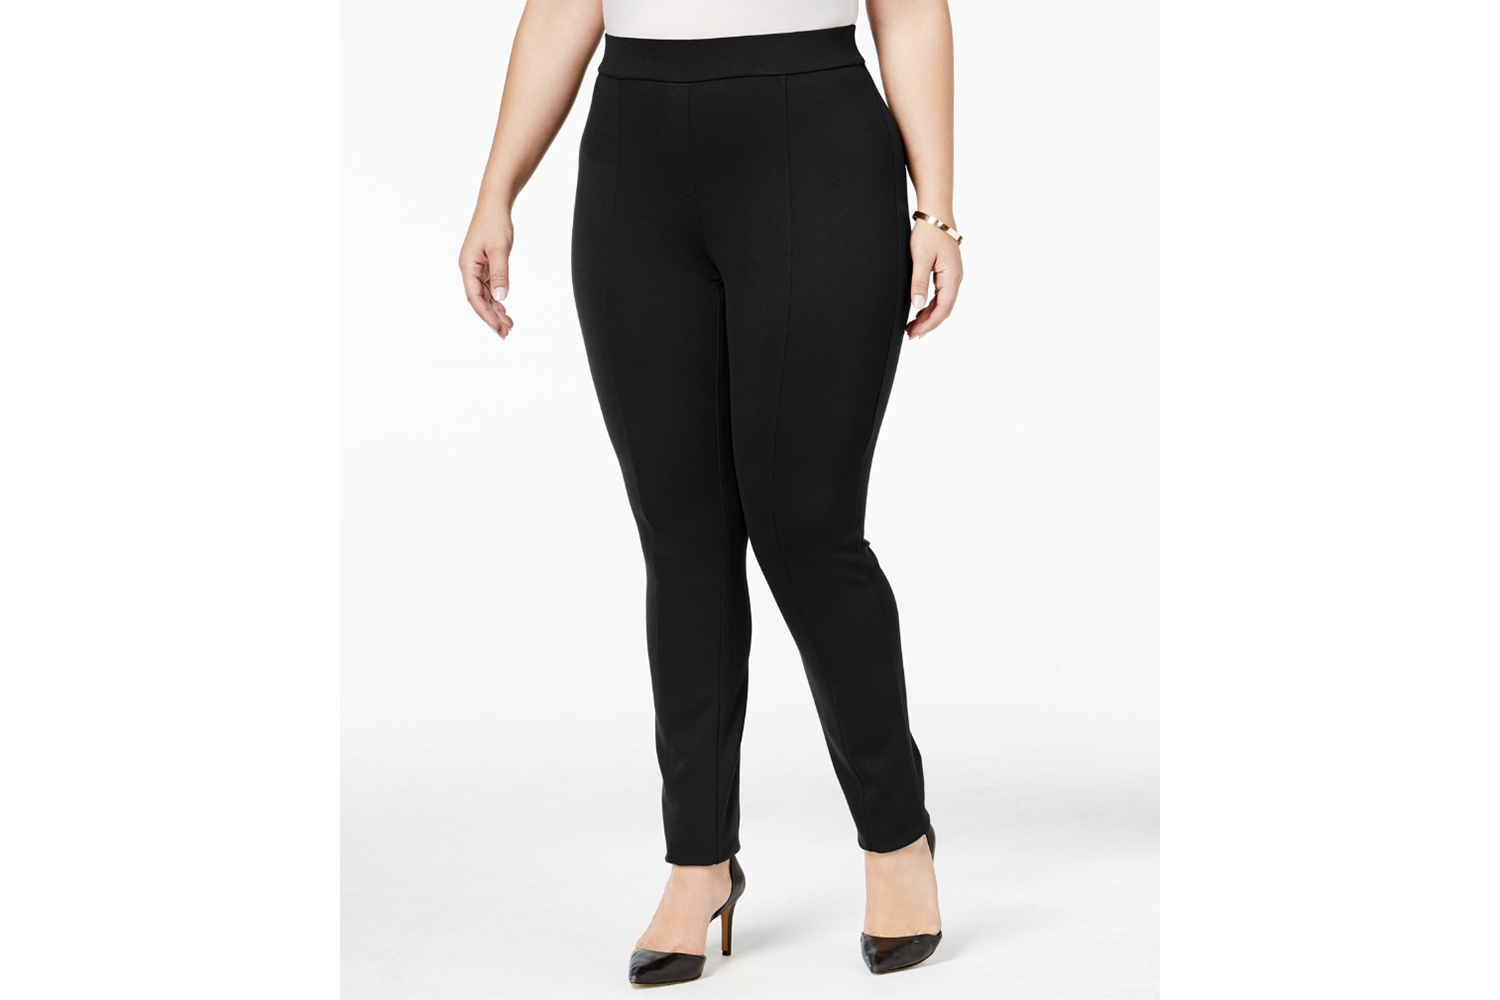 15 Best Winter Plus Size Leggings for Even the Coldest Weather